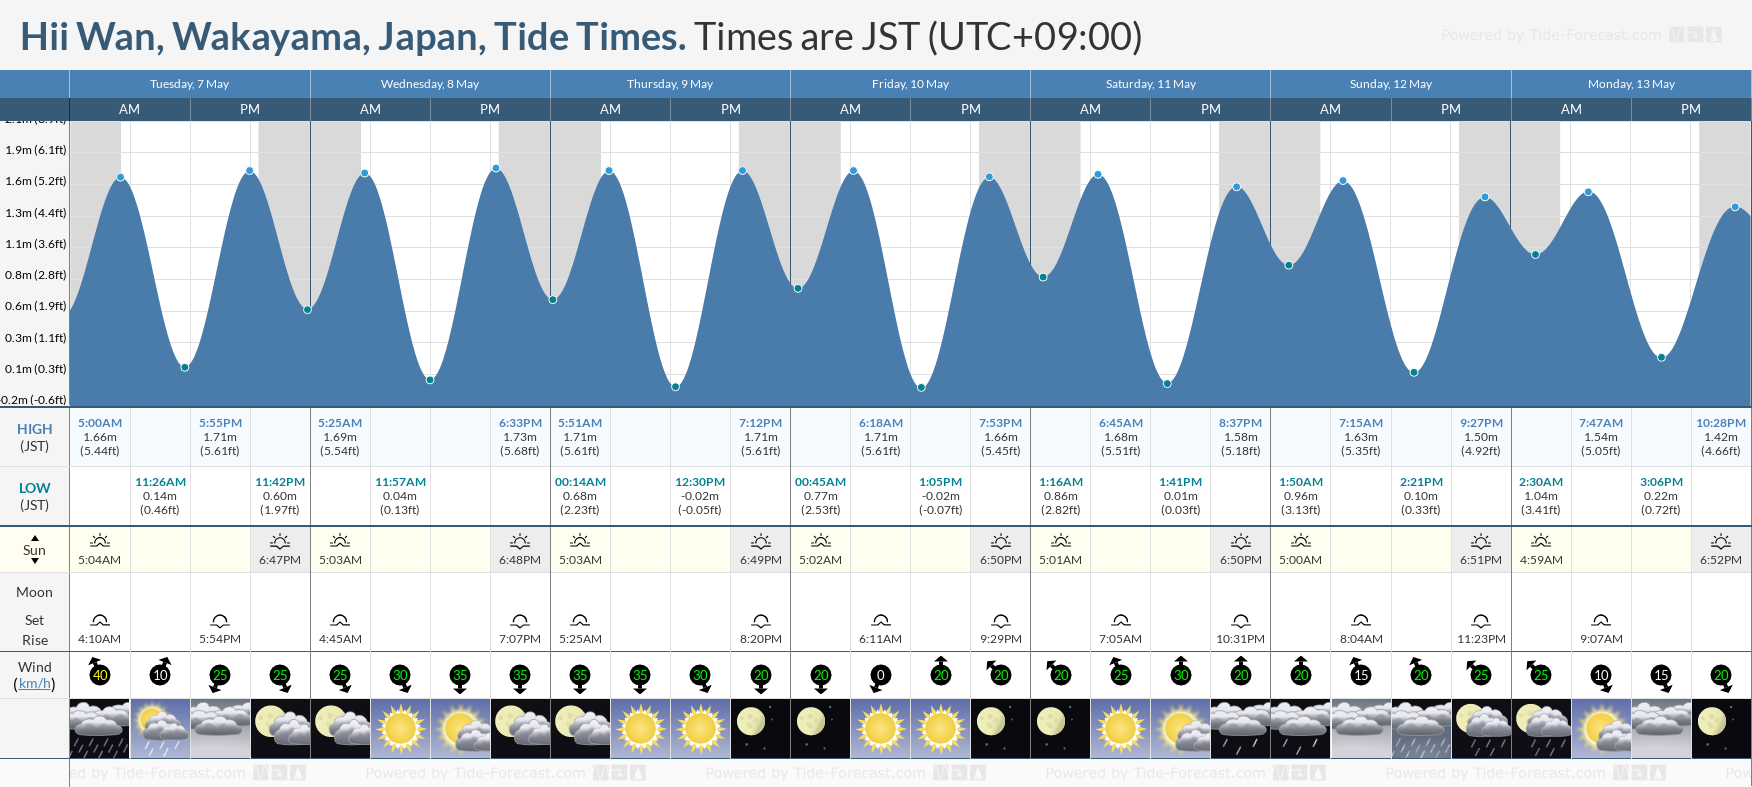 Hii Wan, Wakayama, Japan Tide Chart including high and low tide times for the next 7 days